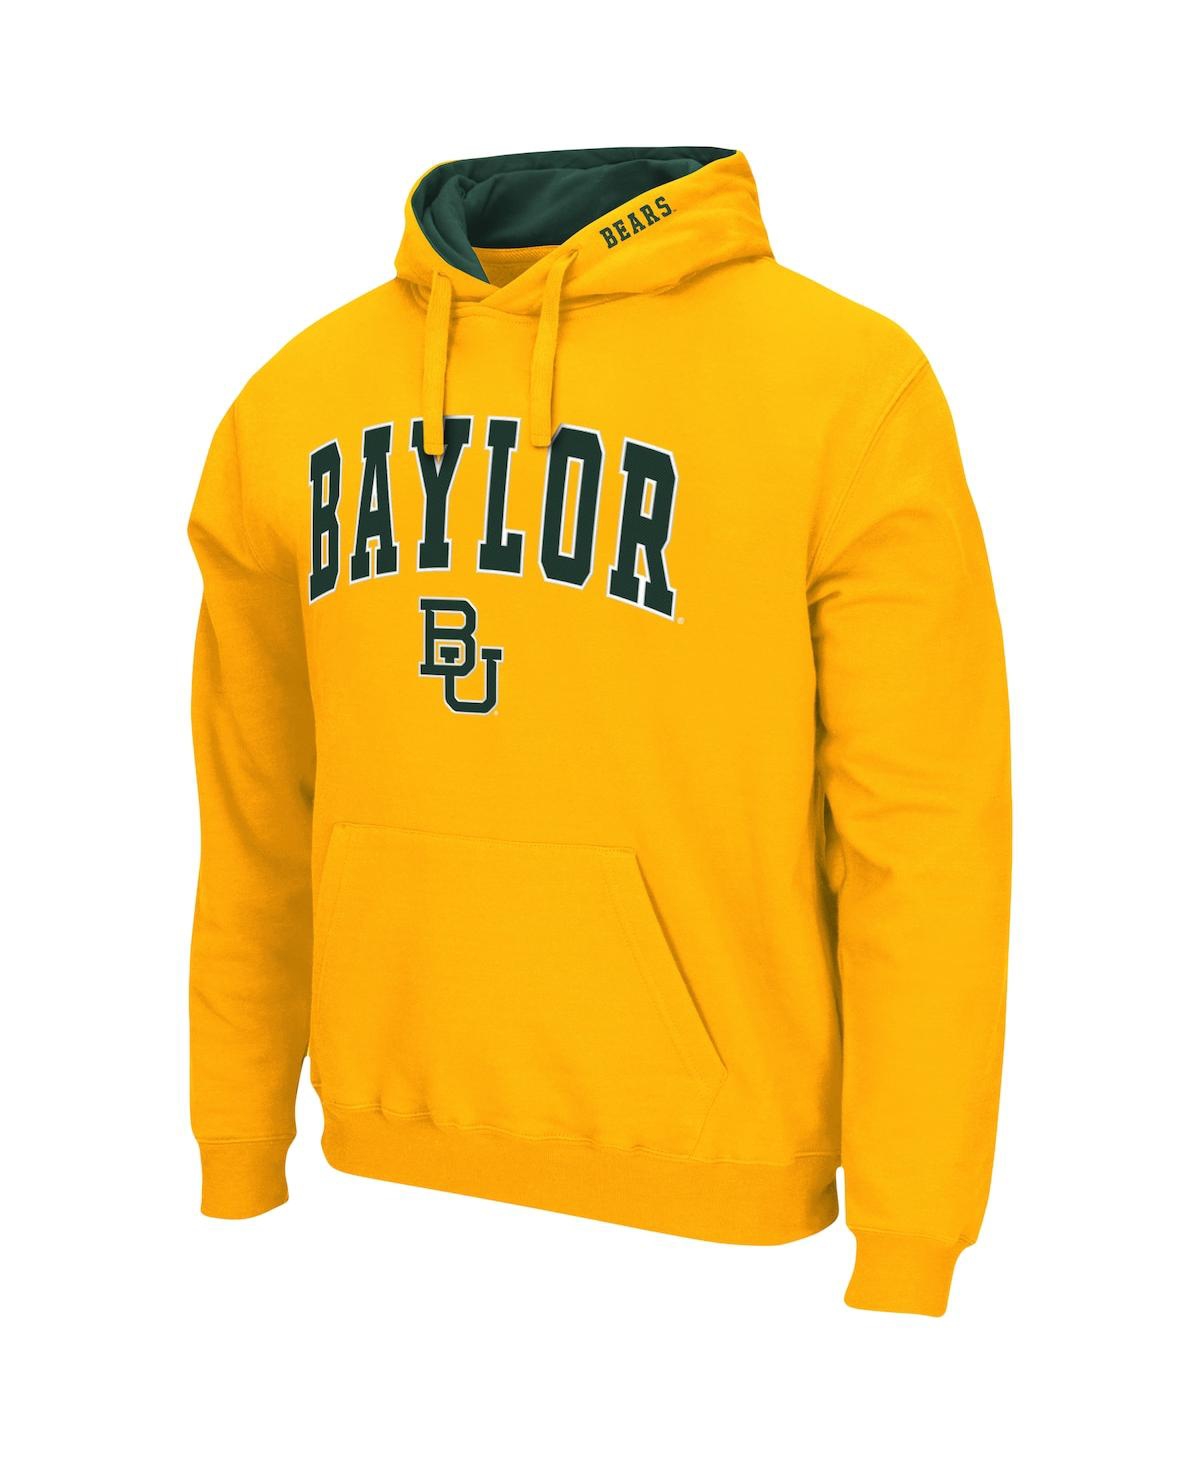 Shop Colosseum Men's Gold Baylor Bears Arch Logo 3.0 Pullover Hoodie